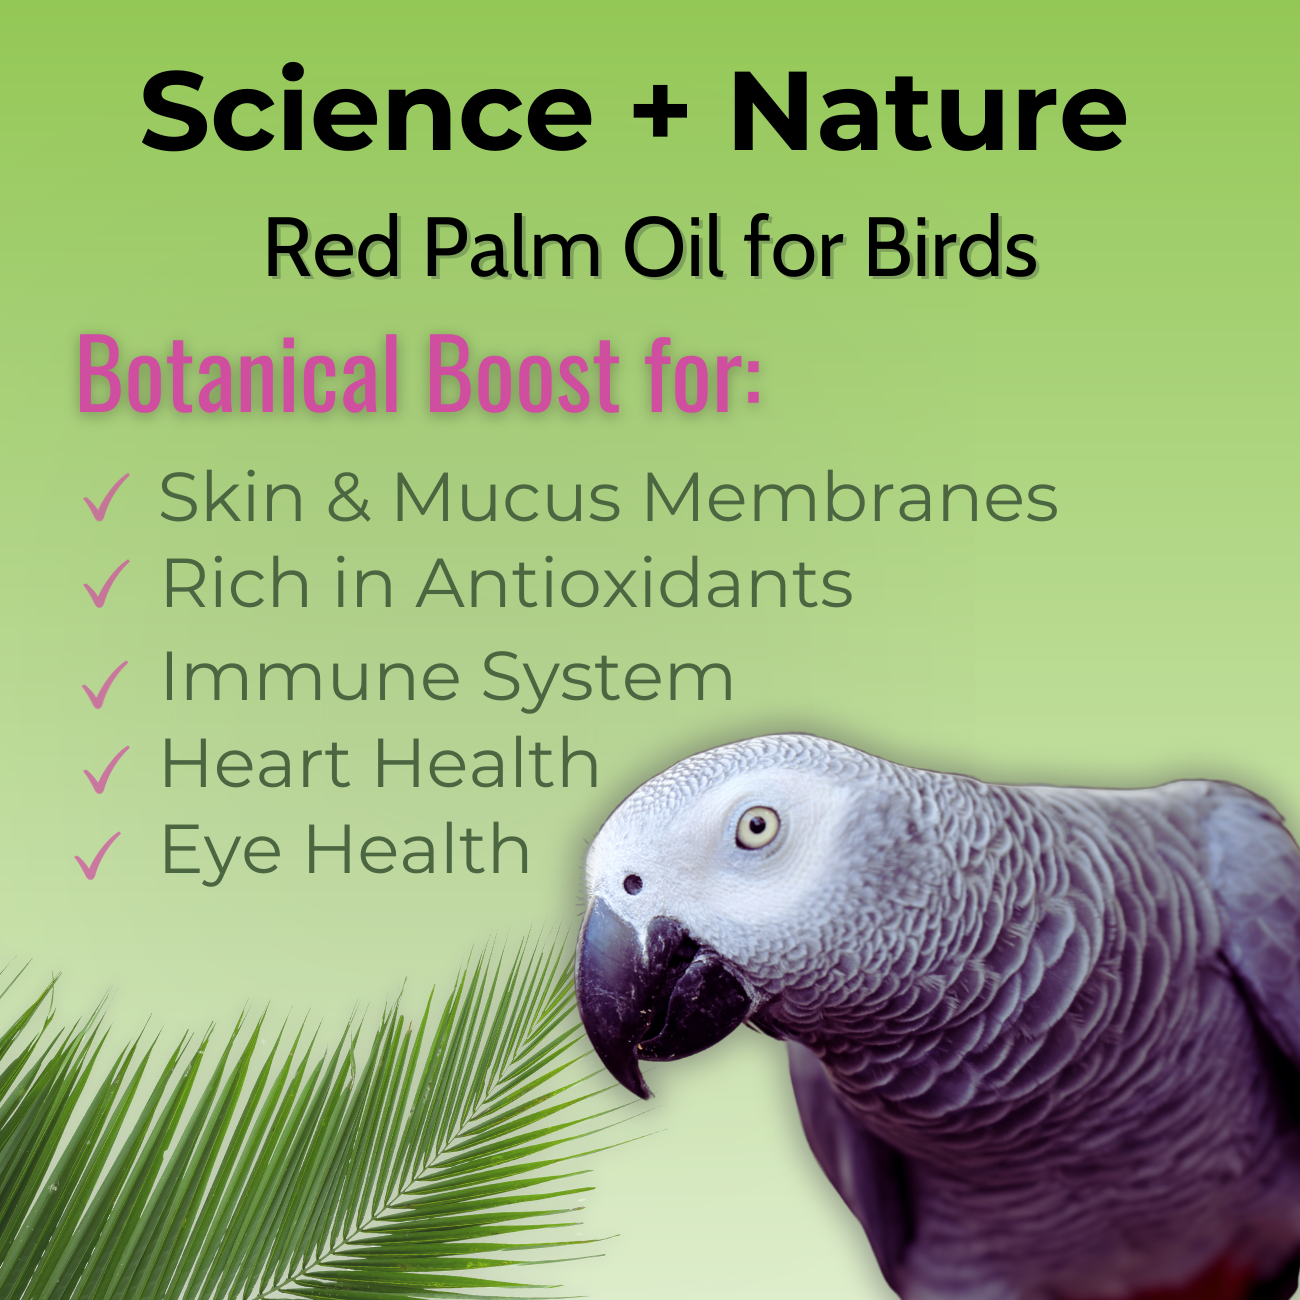 Red Palm Oil for Birds